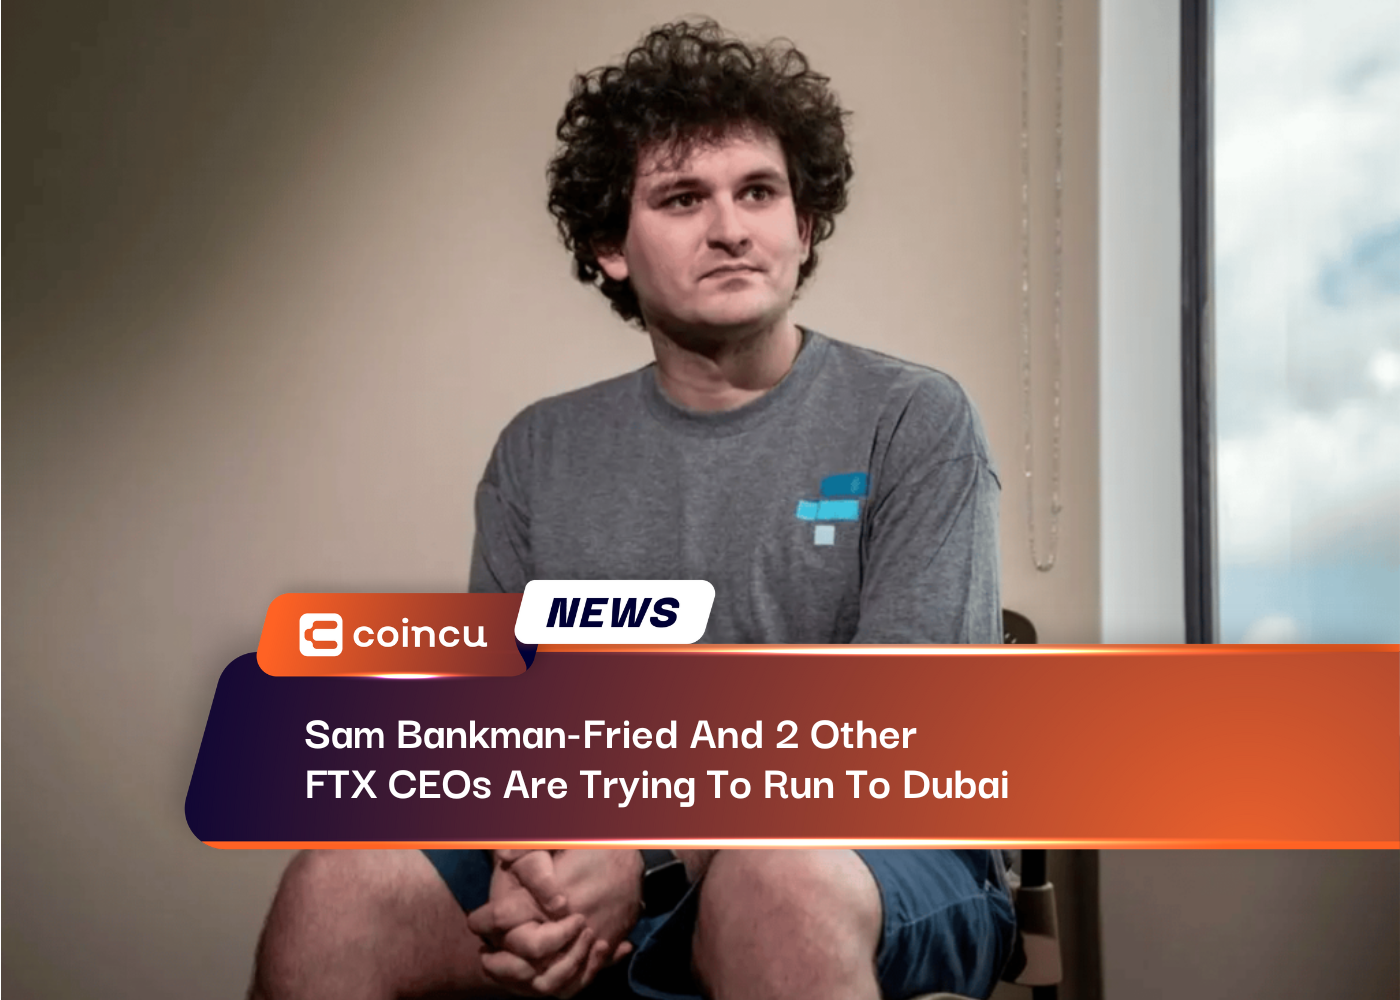 Sam Bankman-Fried And 2 Other FTX CEOs Are Trying To Run To Dubai